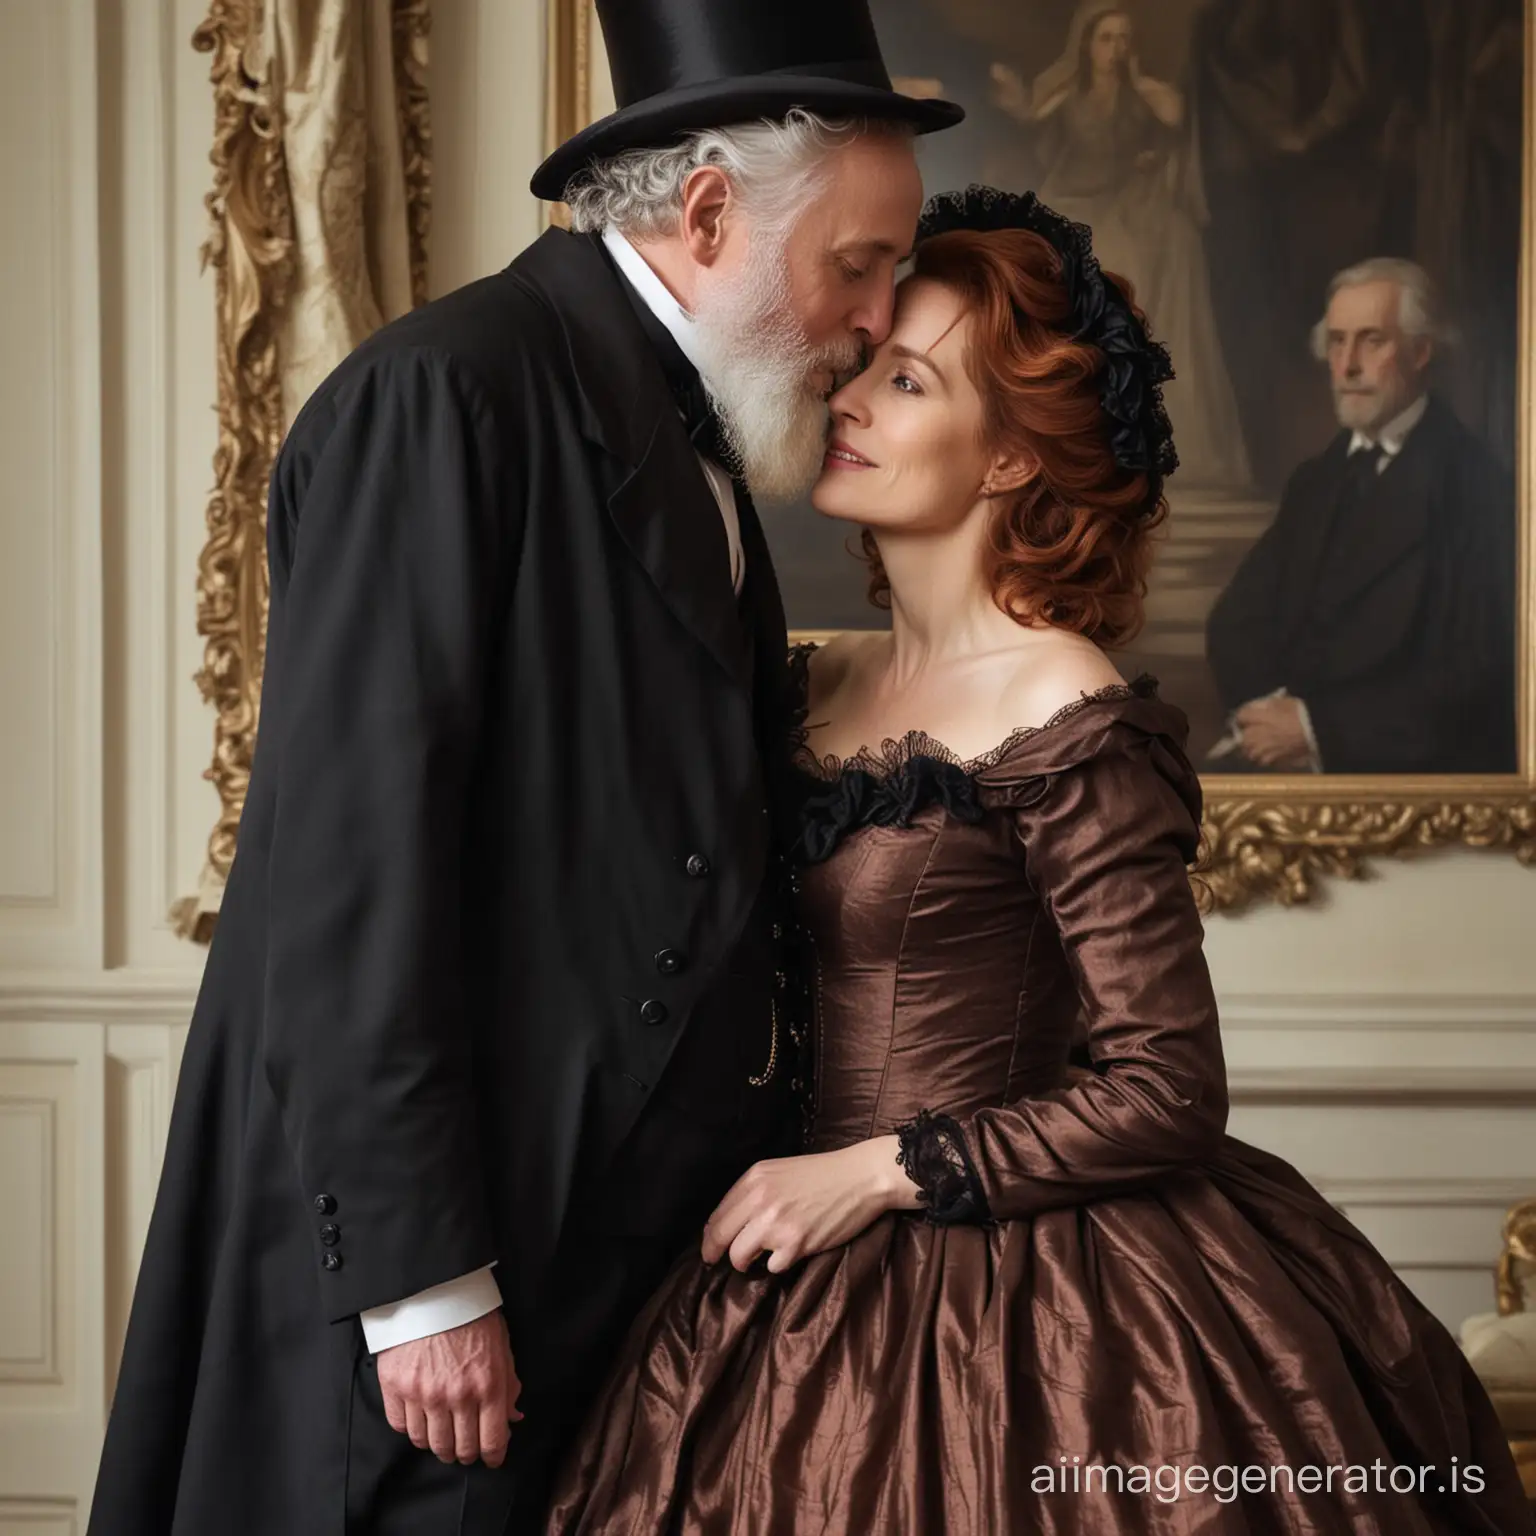 red hair Gillian Anderson wearing a dark brown floor-length loose billowing 1860 victorian crinoline poofy dress with a frilly bonnet kissing an old man dressed into a black victorian suit who seems to be her newlywed husband
